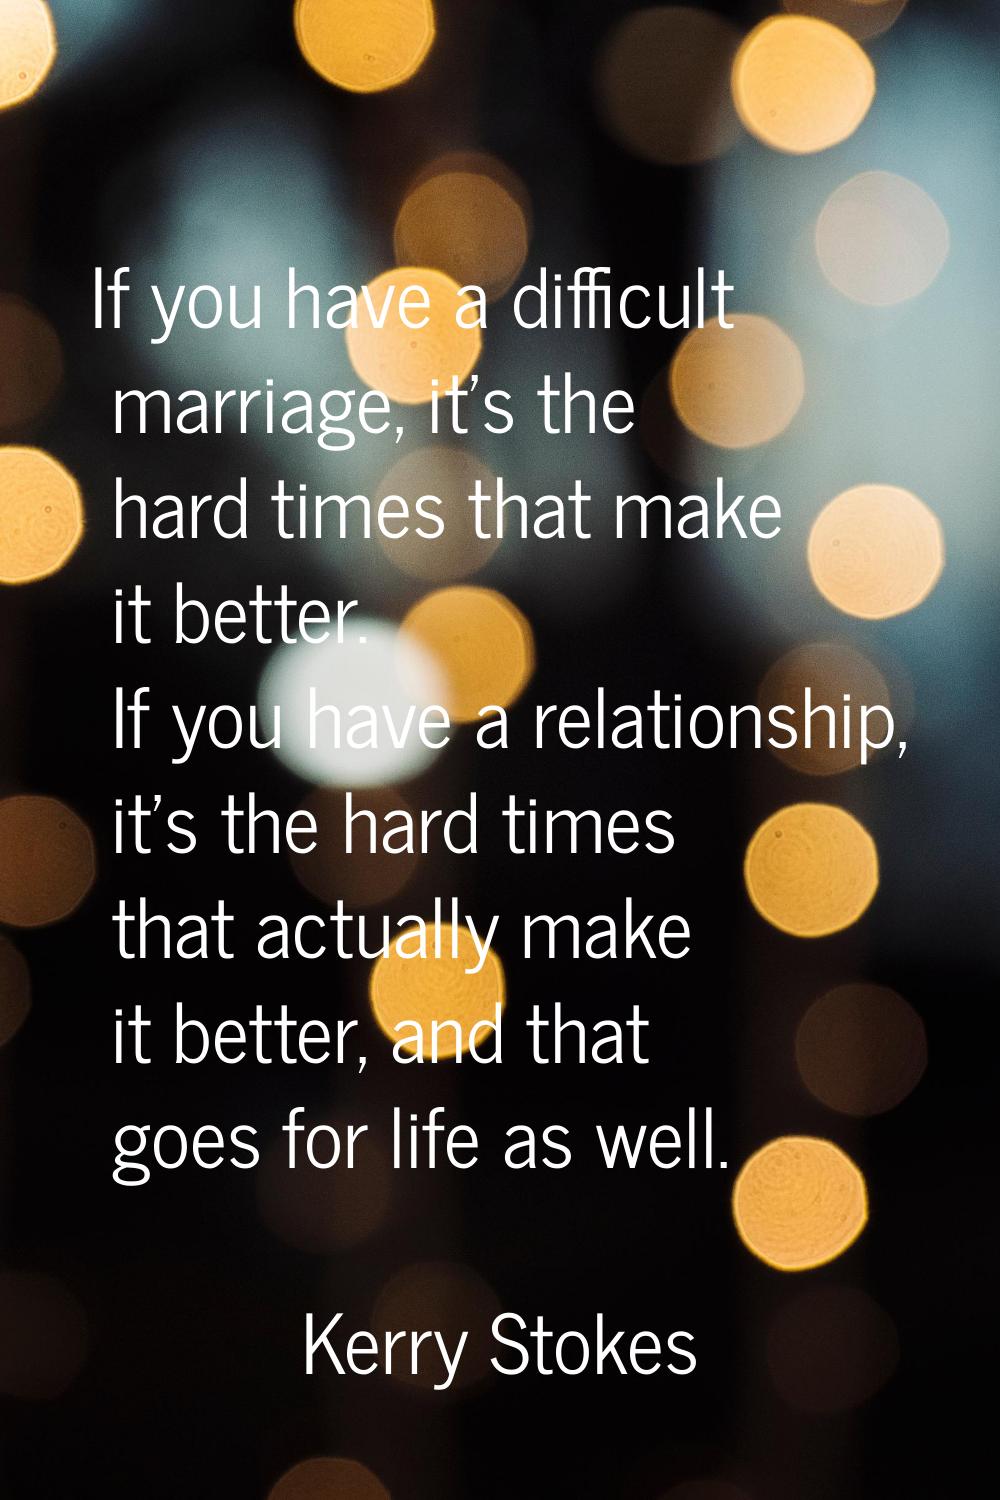 If you have a difficult marriage, it's the hard times that make it better. If you have a relationsh